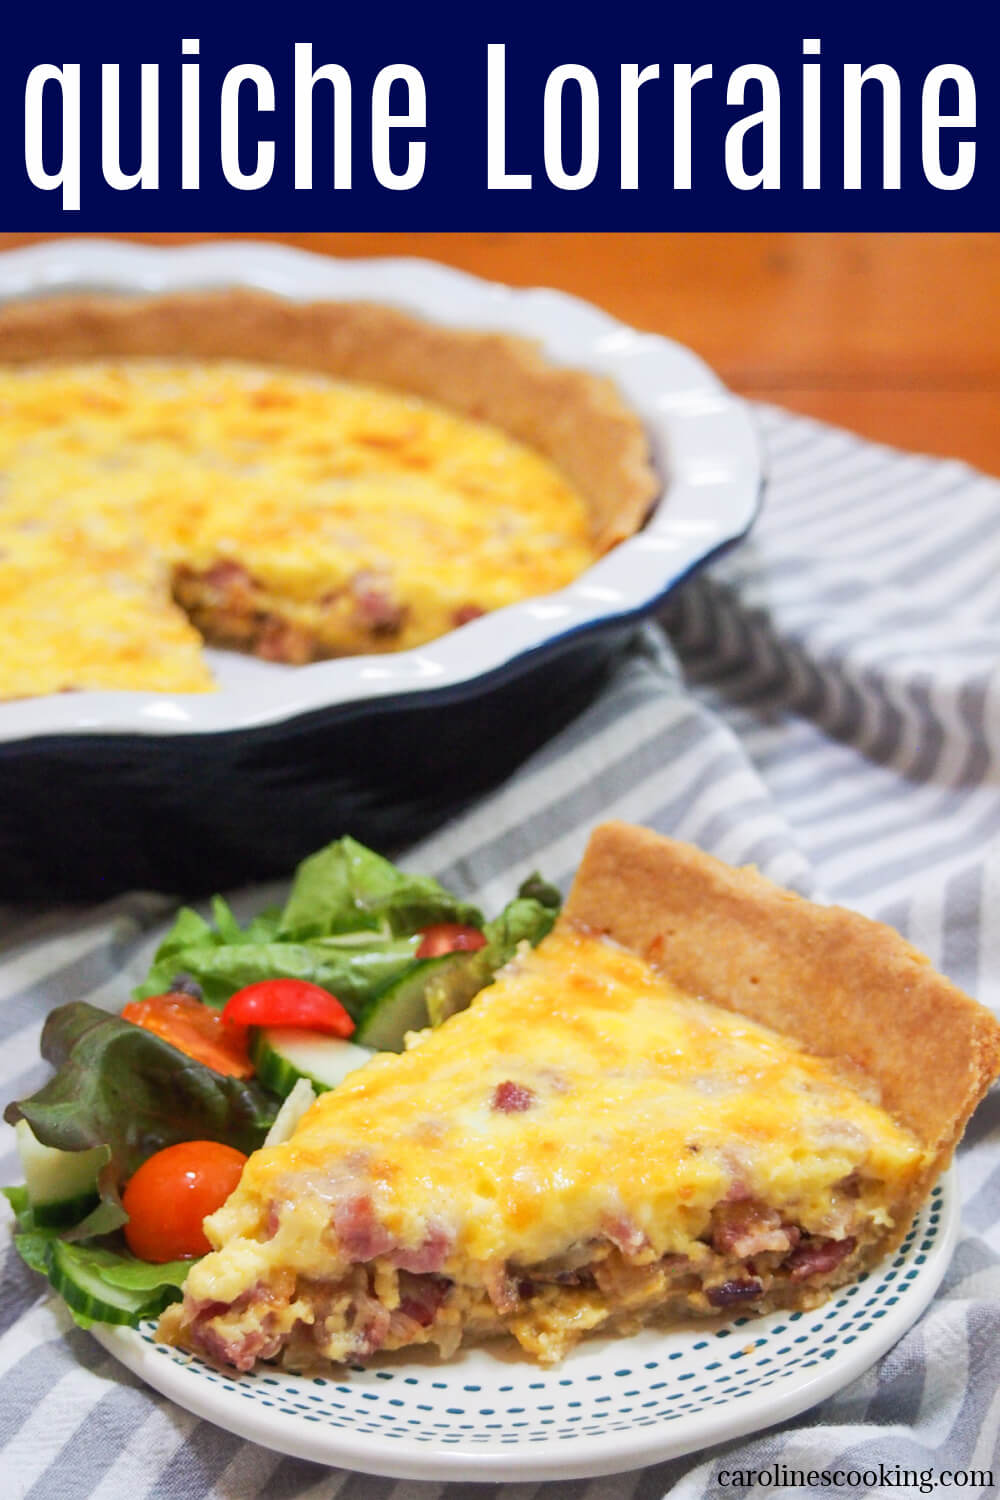 Quiche Lorraine is a classic French savory tart packed with gruyere cheese, bacon and smoked ham.  Comforting and delicious, it makes a great lunch, or add it to your brunch table.